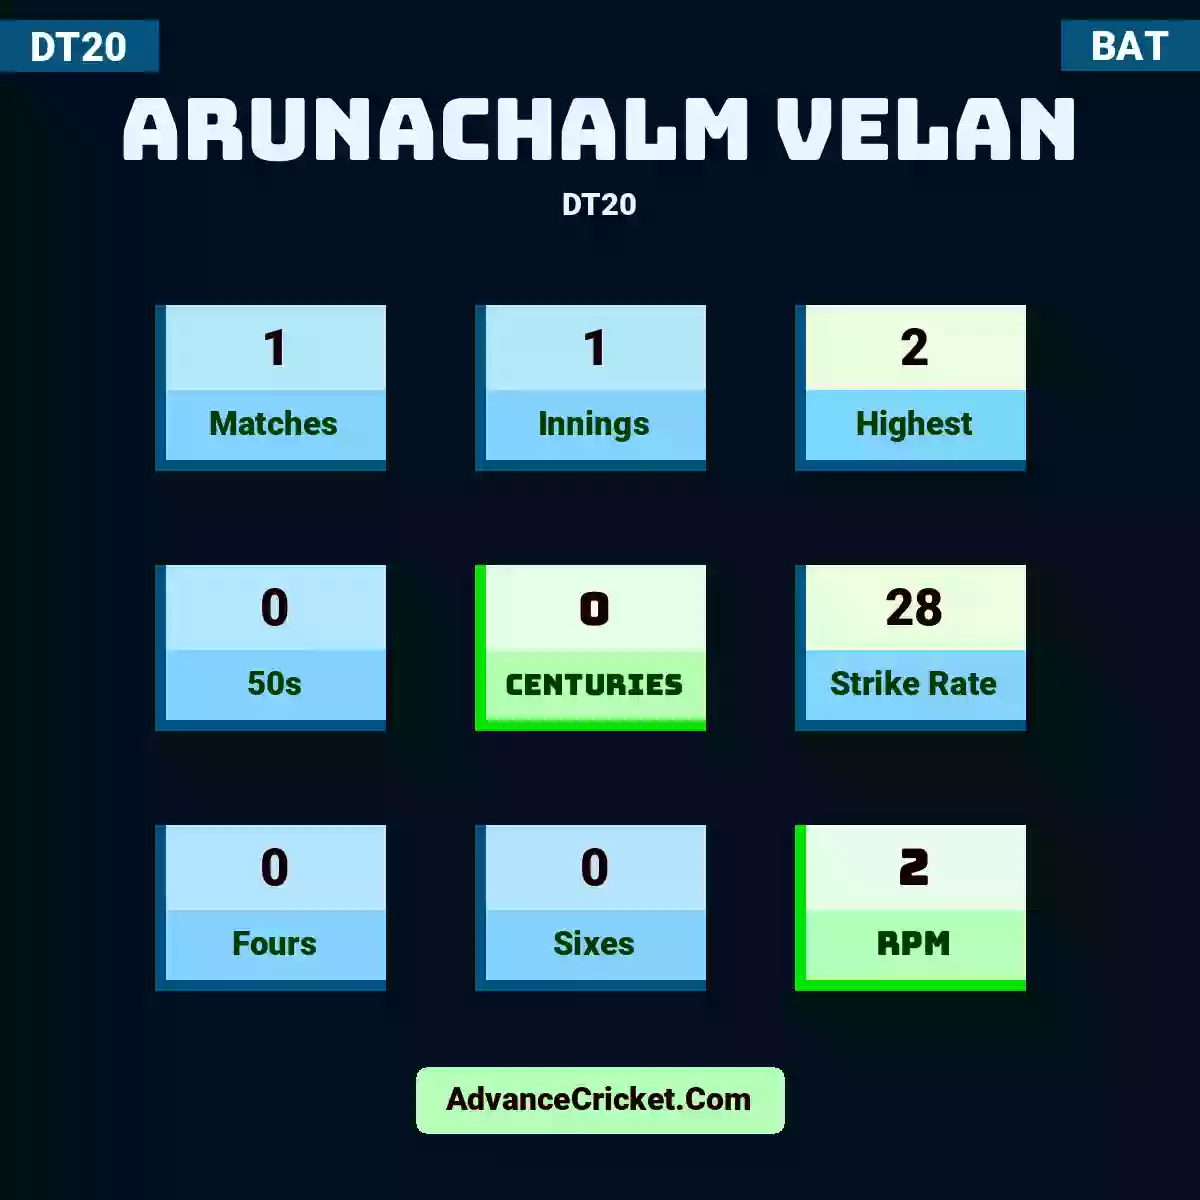 Arunachalm Velan DT20 , Arunachalm Velan played 1 matches, scored 2 runs as highest, 0 half-centuries, and 0 centuries, with a strike rate of 28. A.Velan hit 0 fours and 0 sixes, with an RPM of 2.